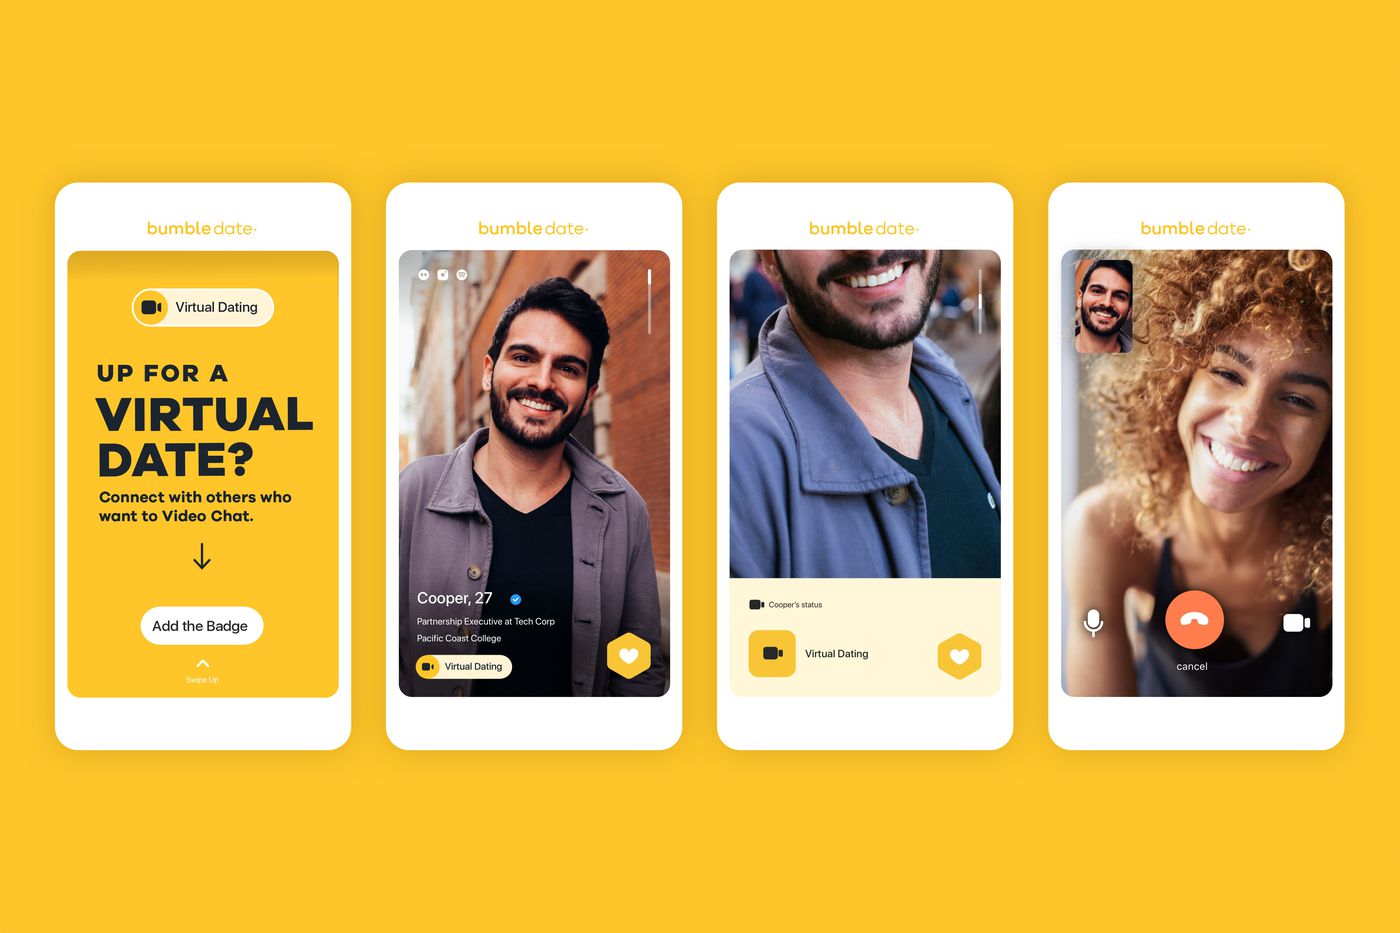 How you can earn from your Bumble like app